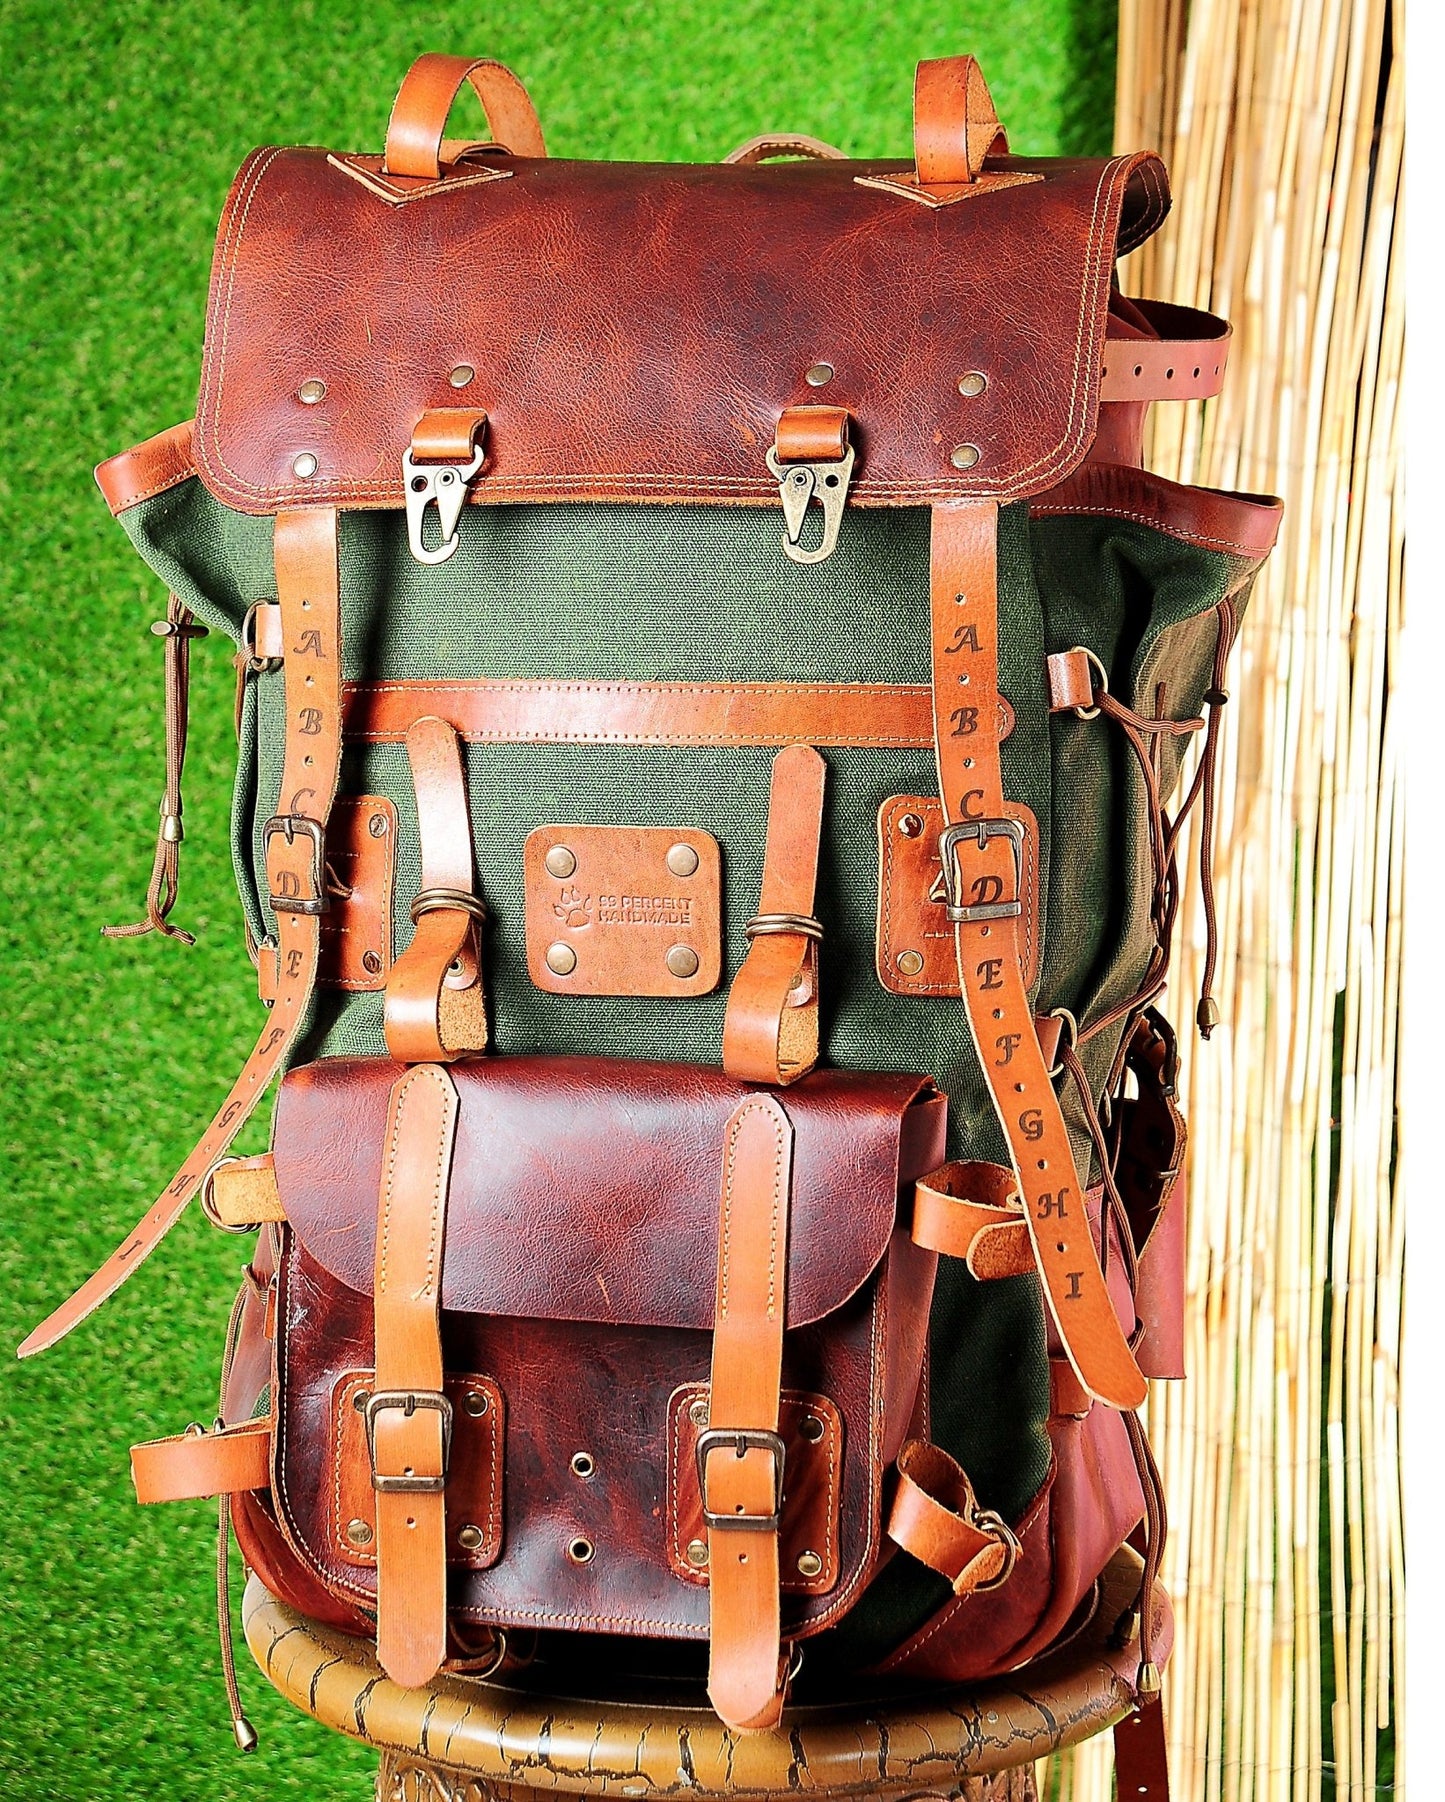 Handmade Leather Backpack | Green | Waxed Canvas Backpack | Bushcraft Backpack | Travel, Camping, Hiking | Personalization for your request bushcraft - camping - hiking backpack 99percenthandmade   